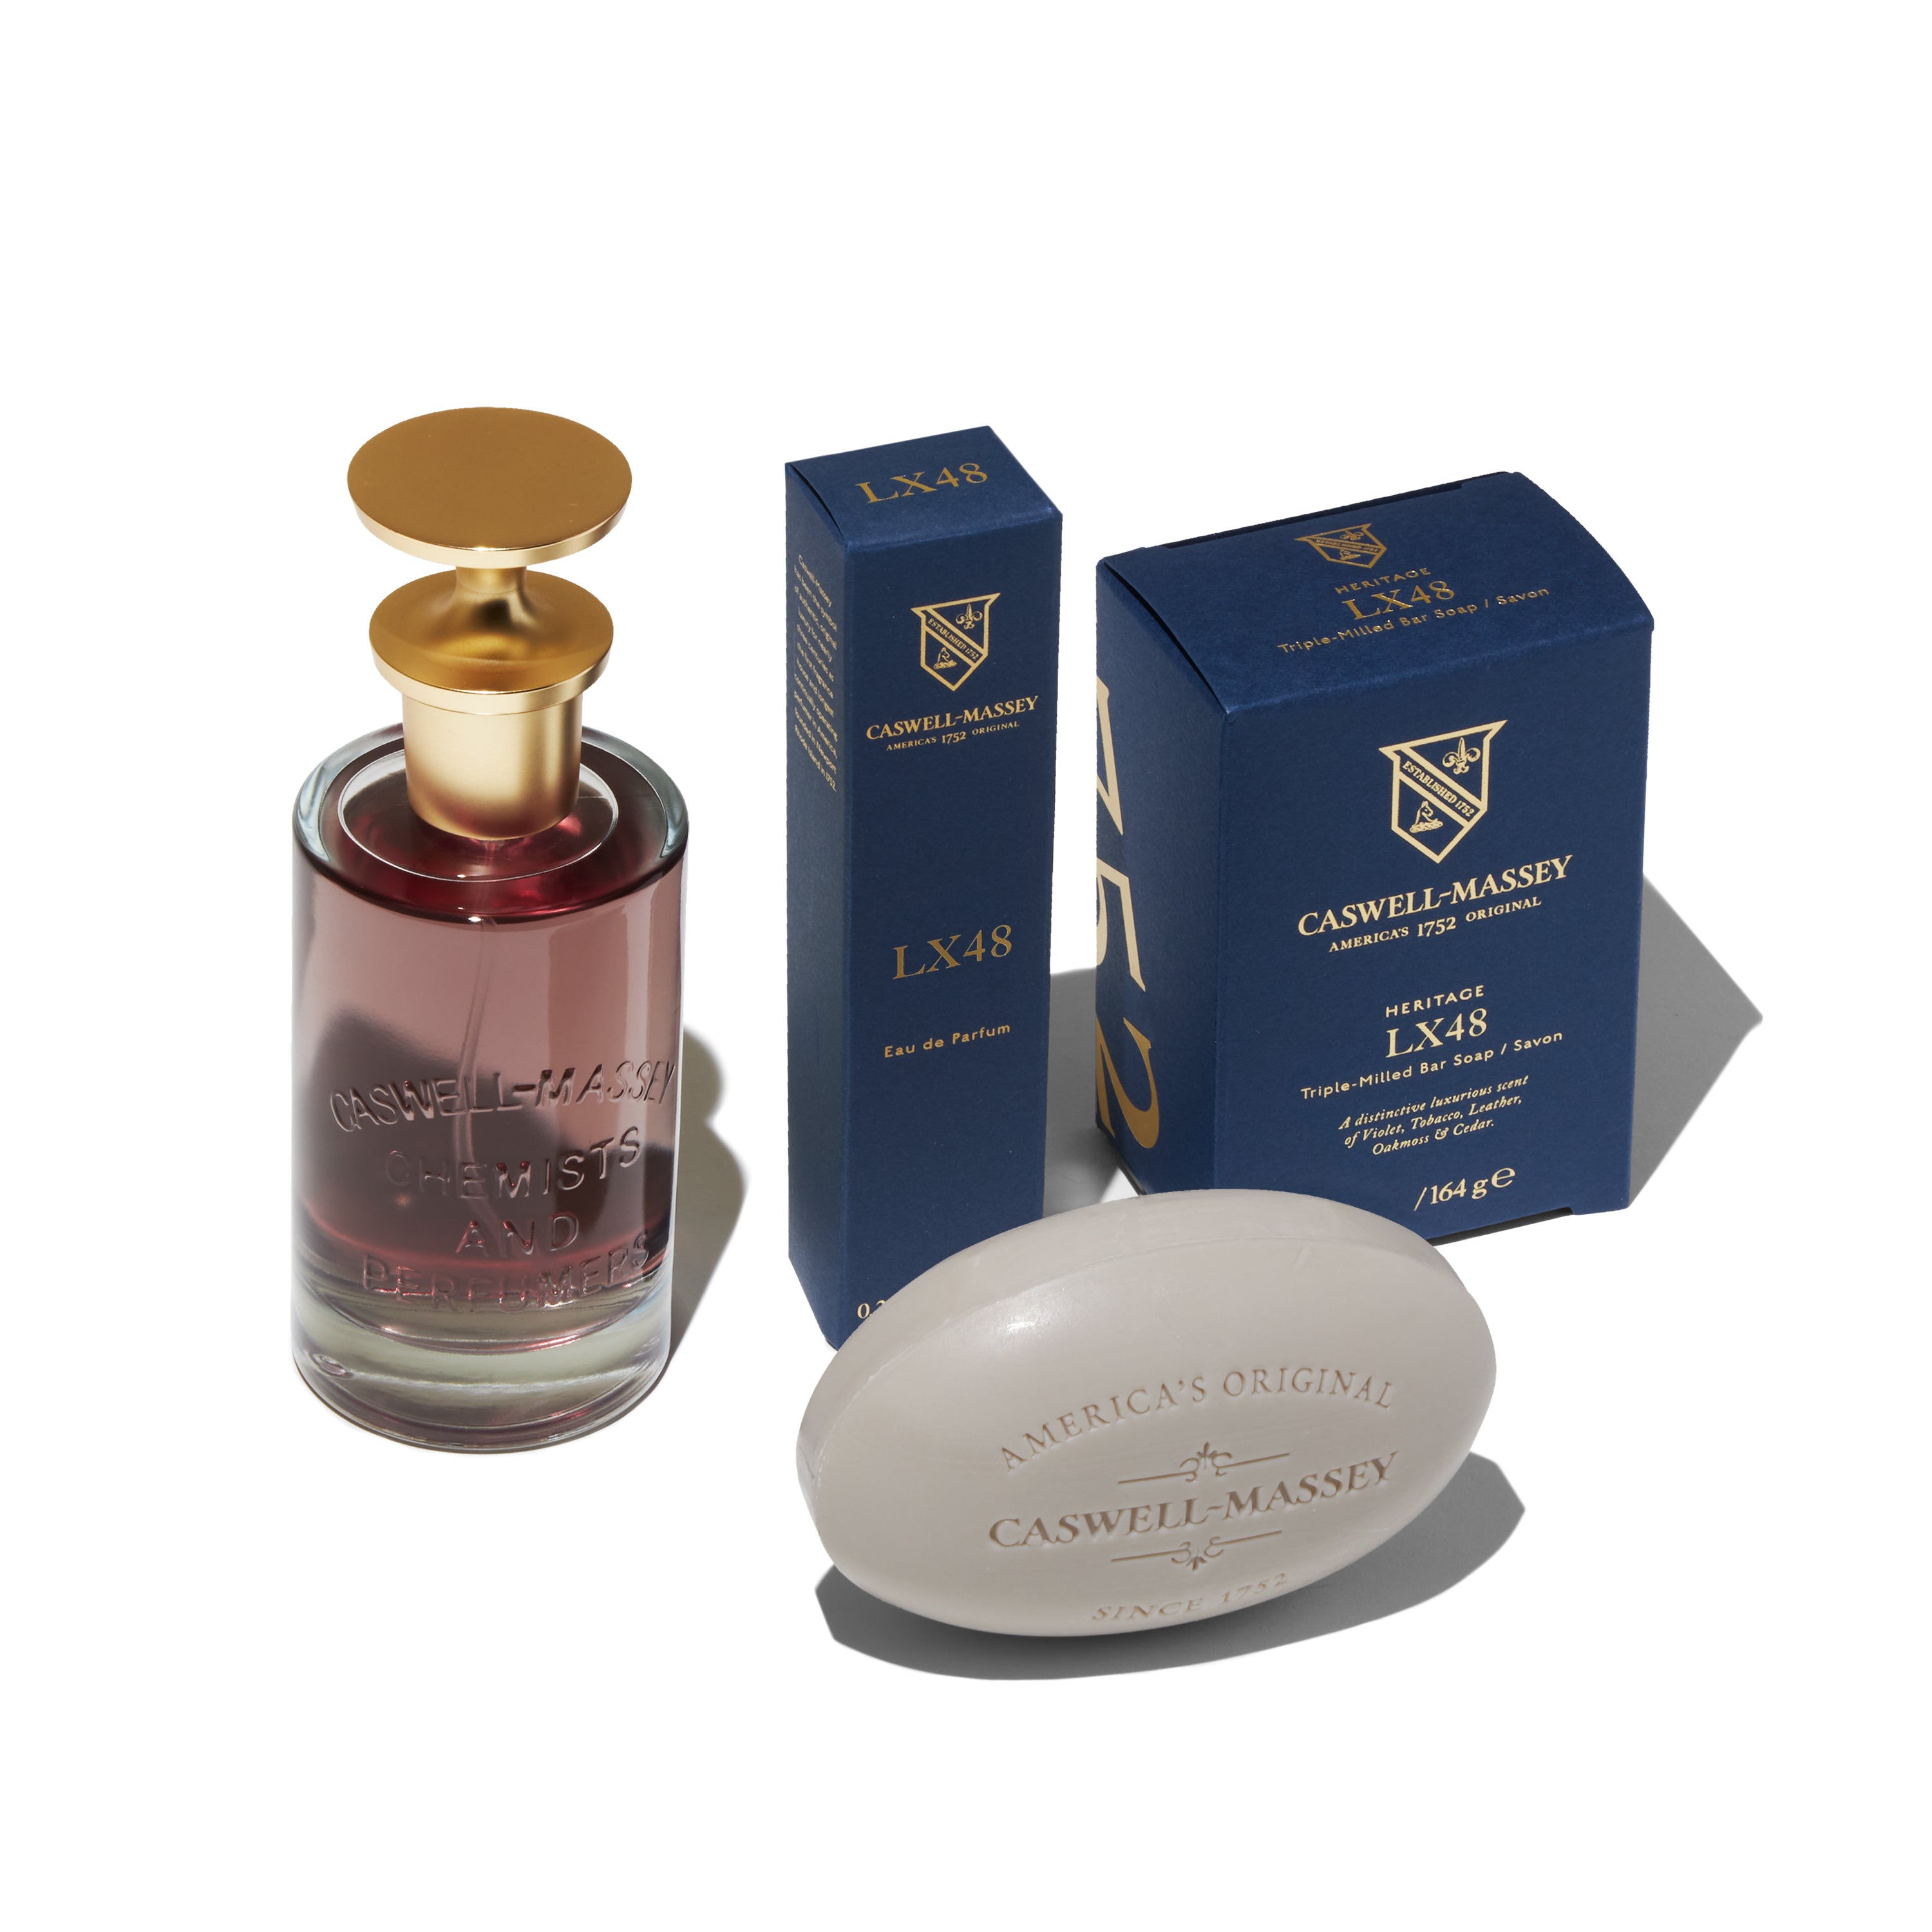 Caswell-Massey LX48 Eau de Parfum showing the full-size 100ml, the travel-size 7.5ml, and the LX48 Bar Soap